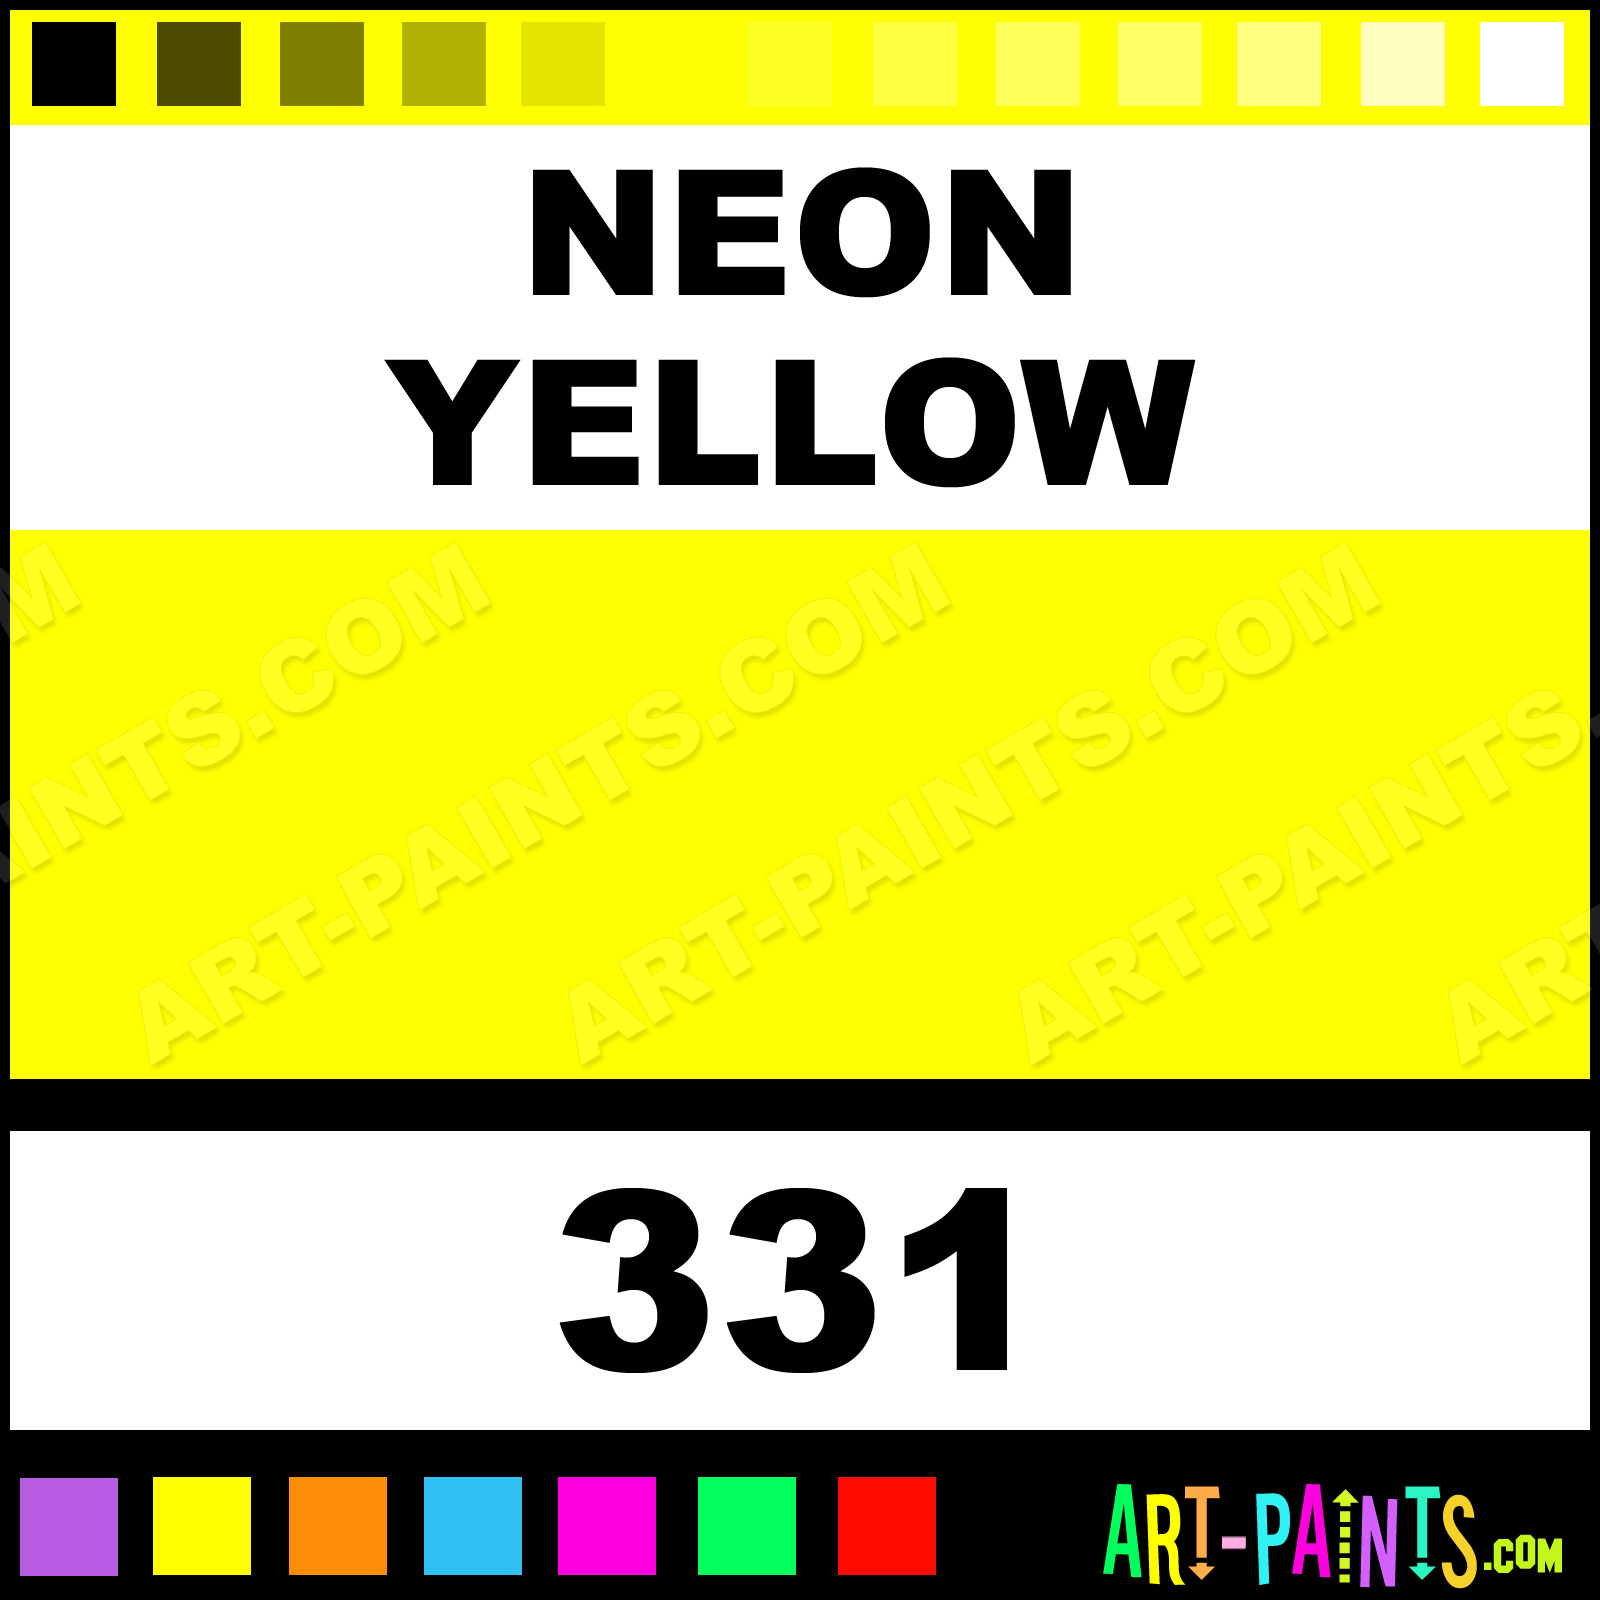 Neon Yellow Lacquer Airbrush Spray Paints - 331 - Neon Yellow Paint, Neon  Yellow Color, Life Tone Lacquer Spray Paint, FFFF01 